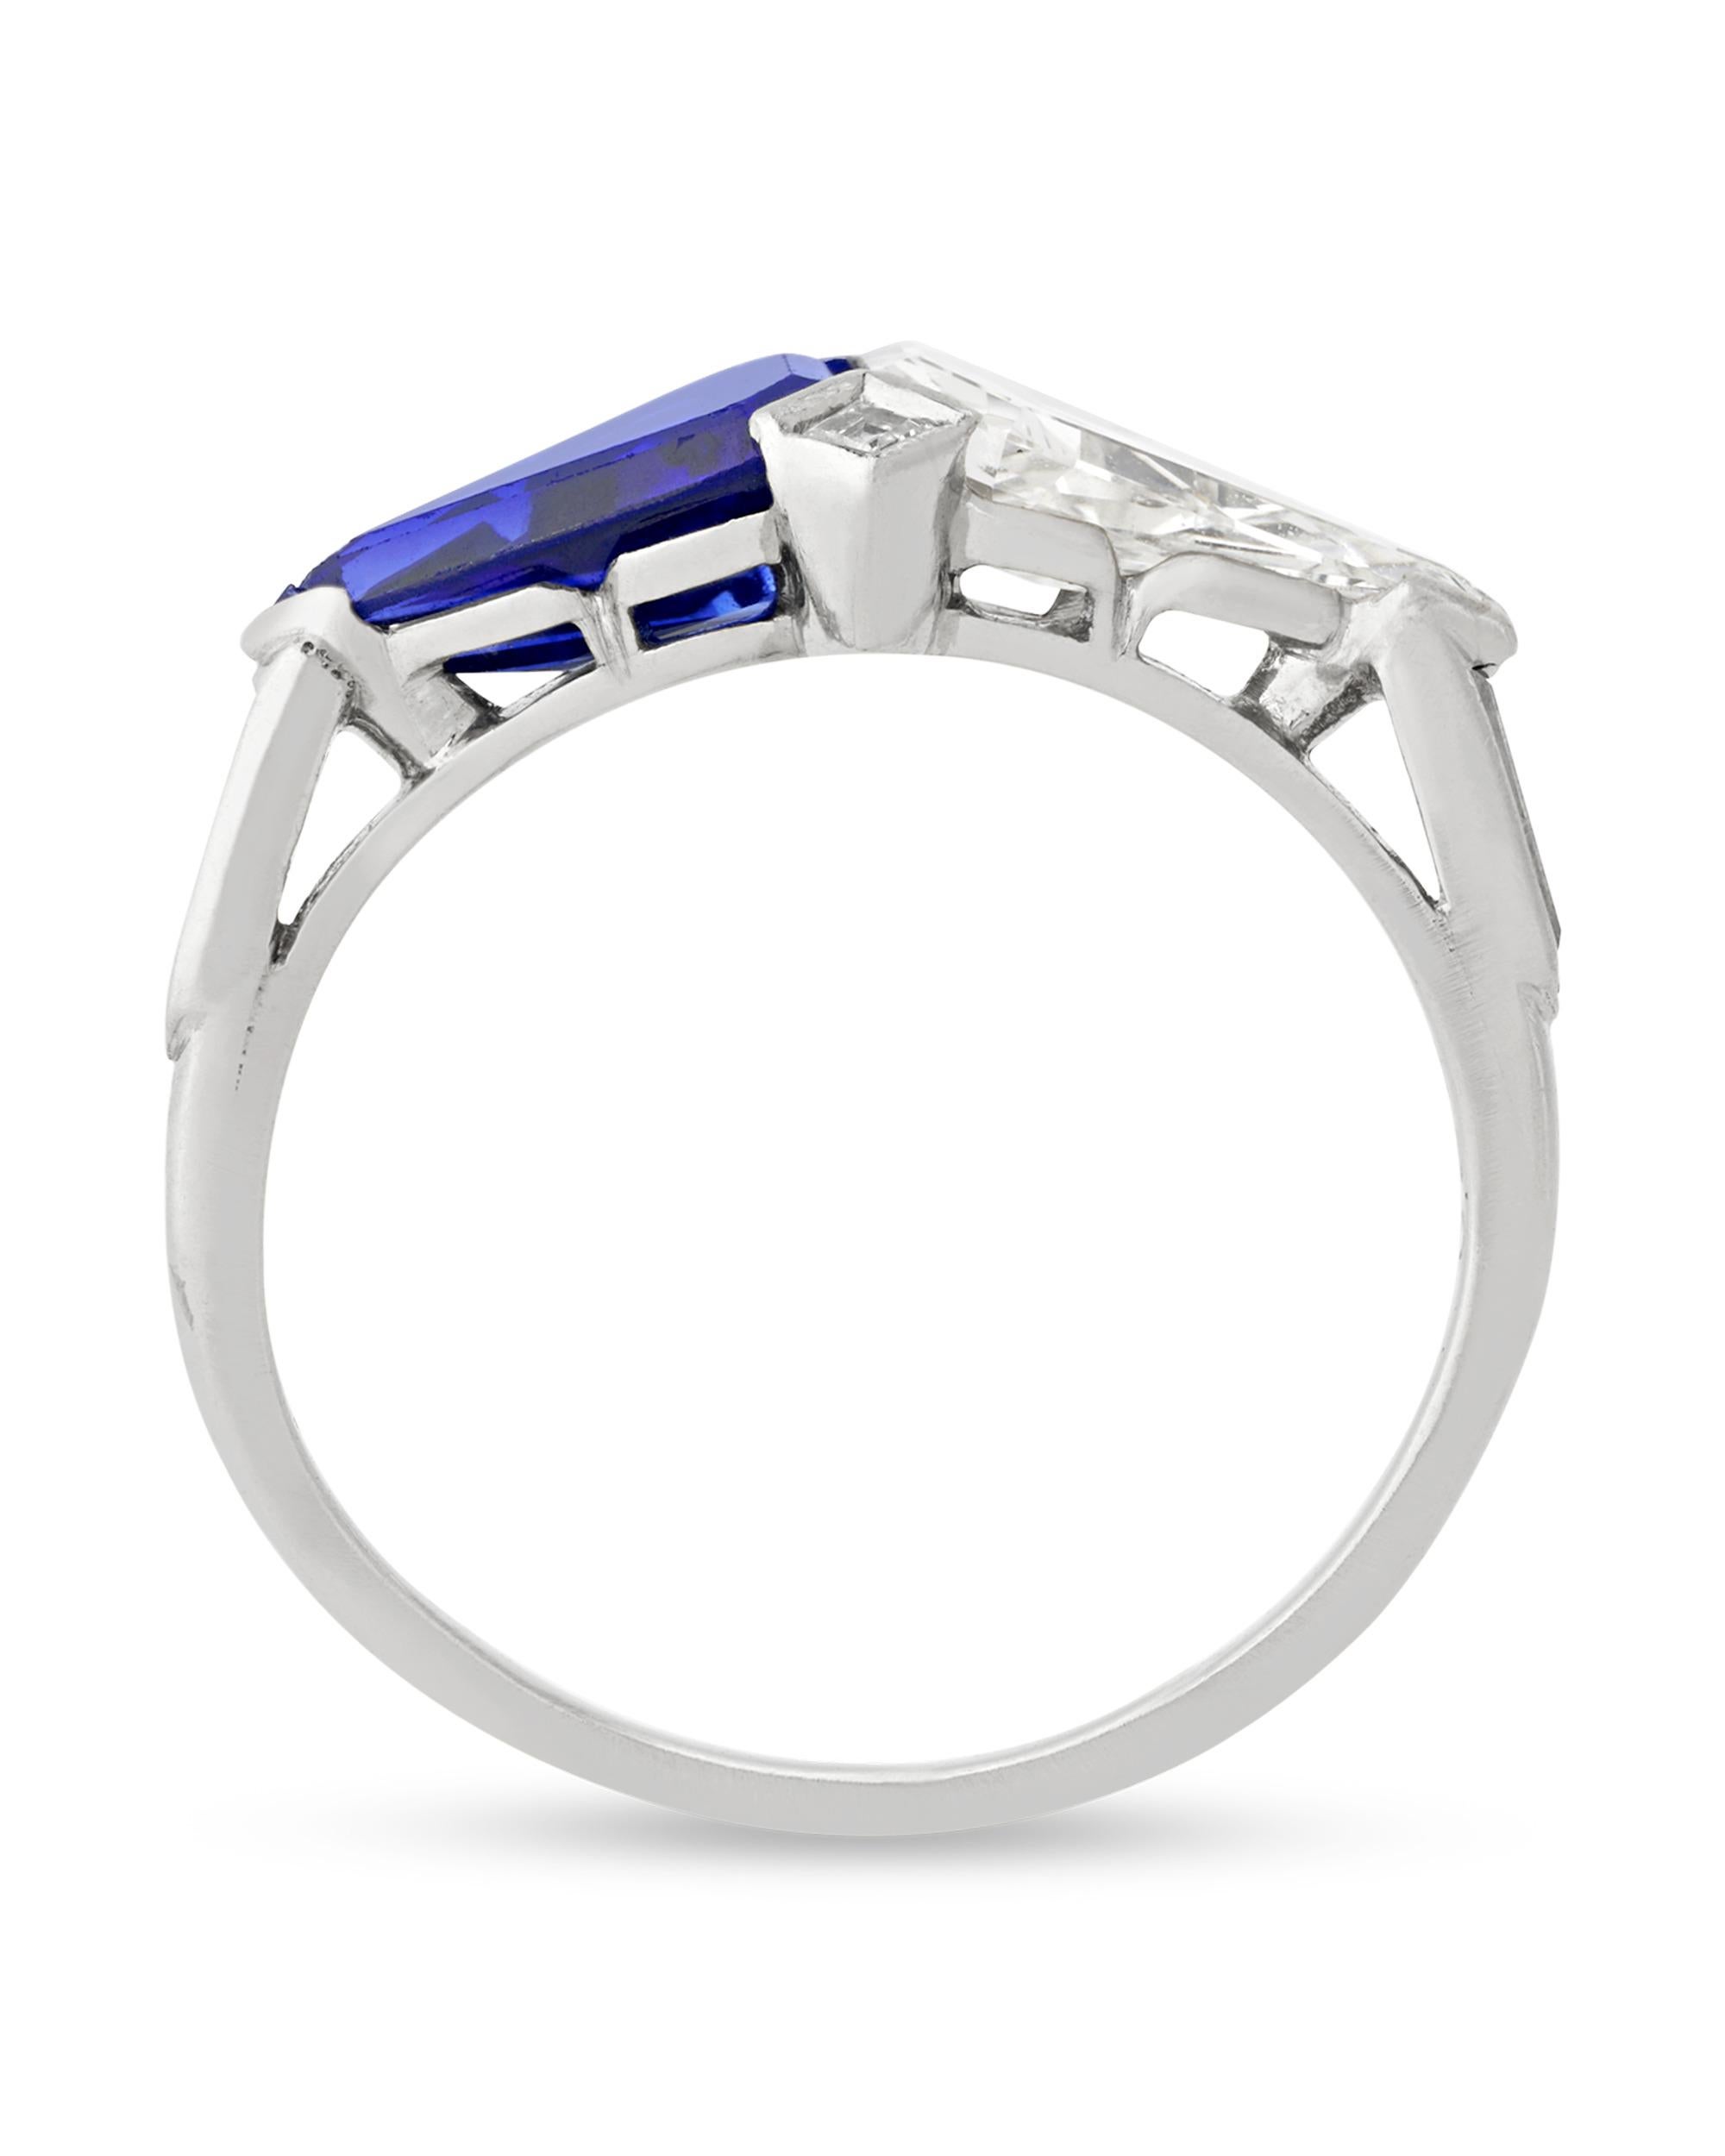 Crafted by the iconic jeweler Tiffany & Co., this beautiful east-west style ring combines a ravishing 1.27-carat royal blue sapphire with a sparkling 1.27-carat white diamond. Each of the gems is cut into a kite shape and placed side by side for a